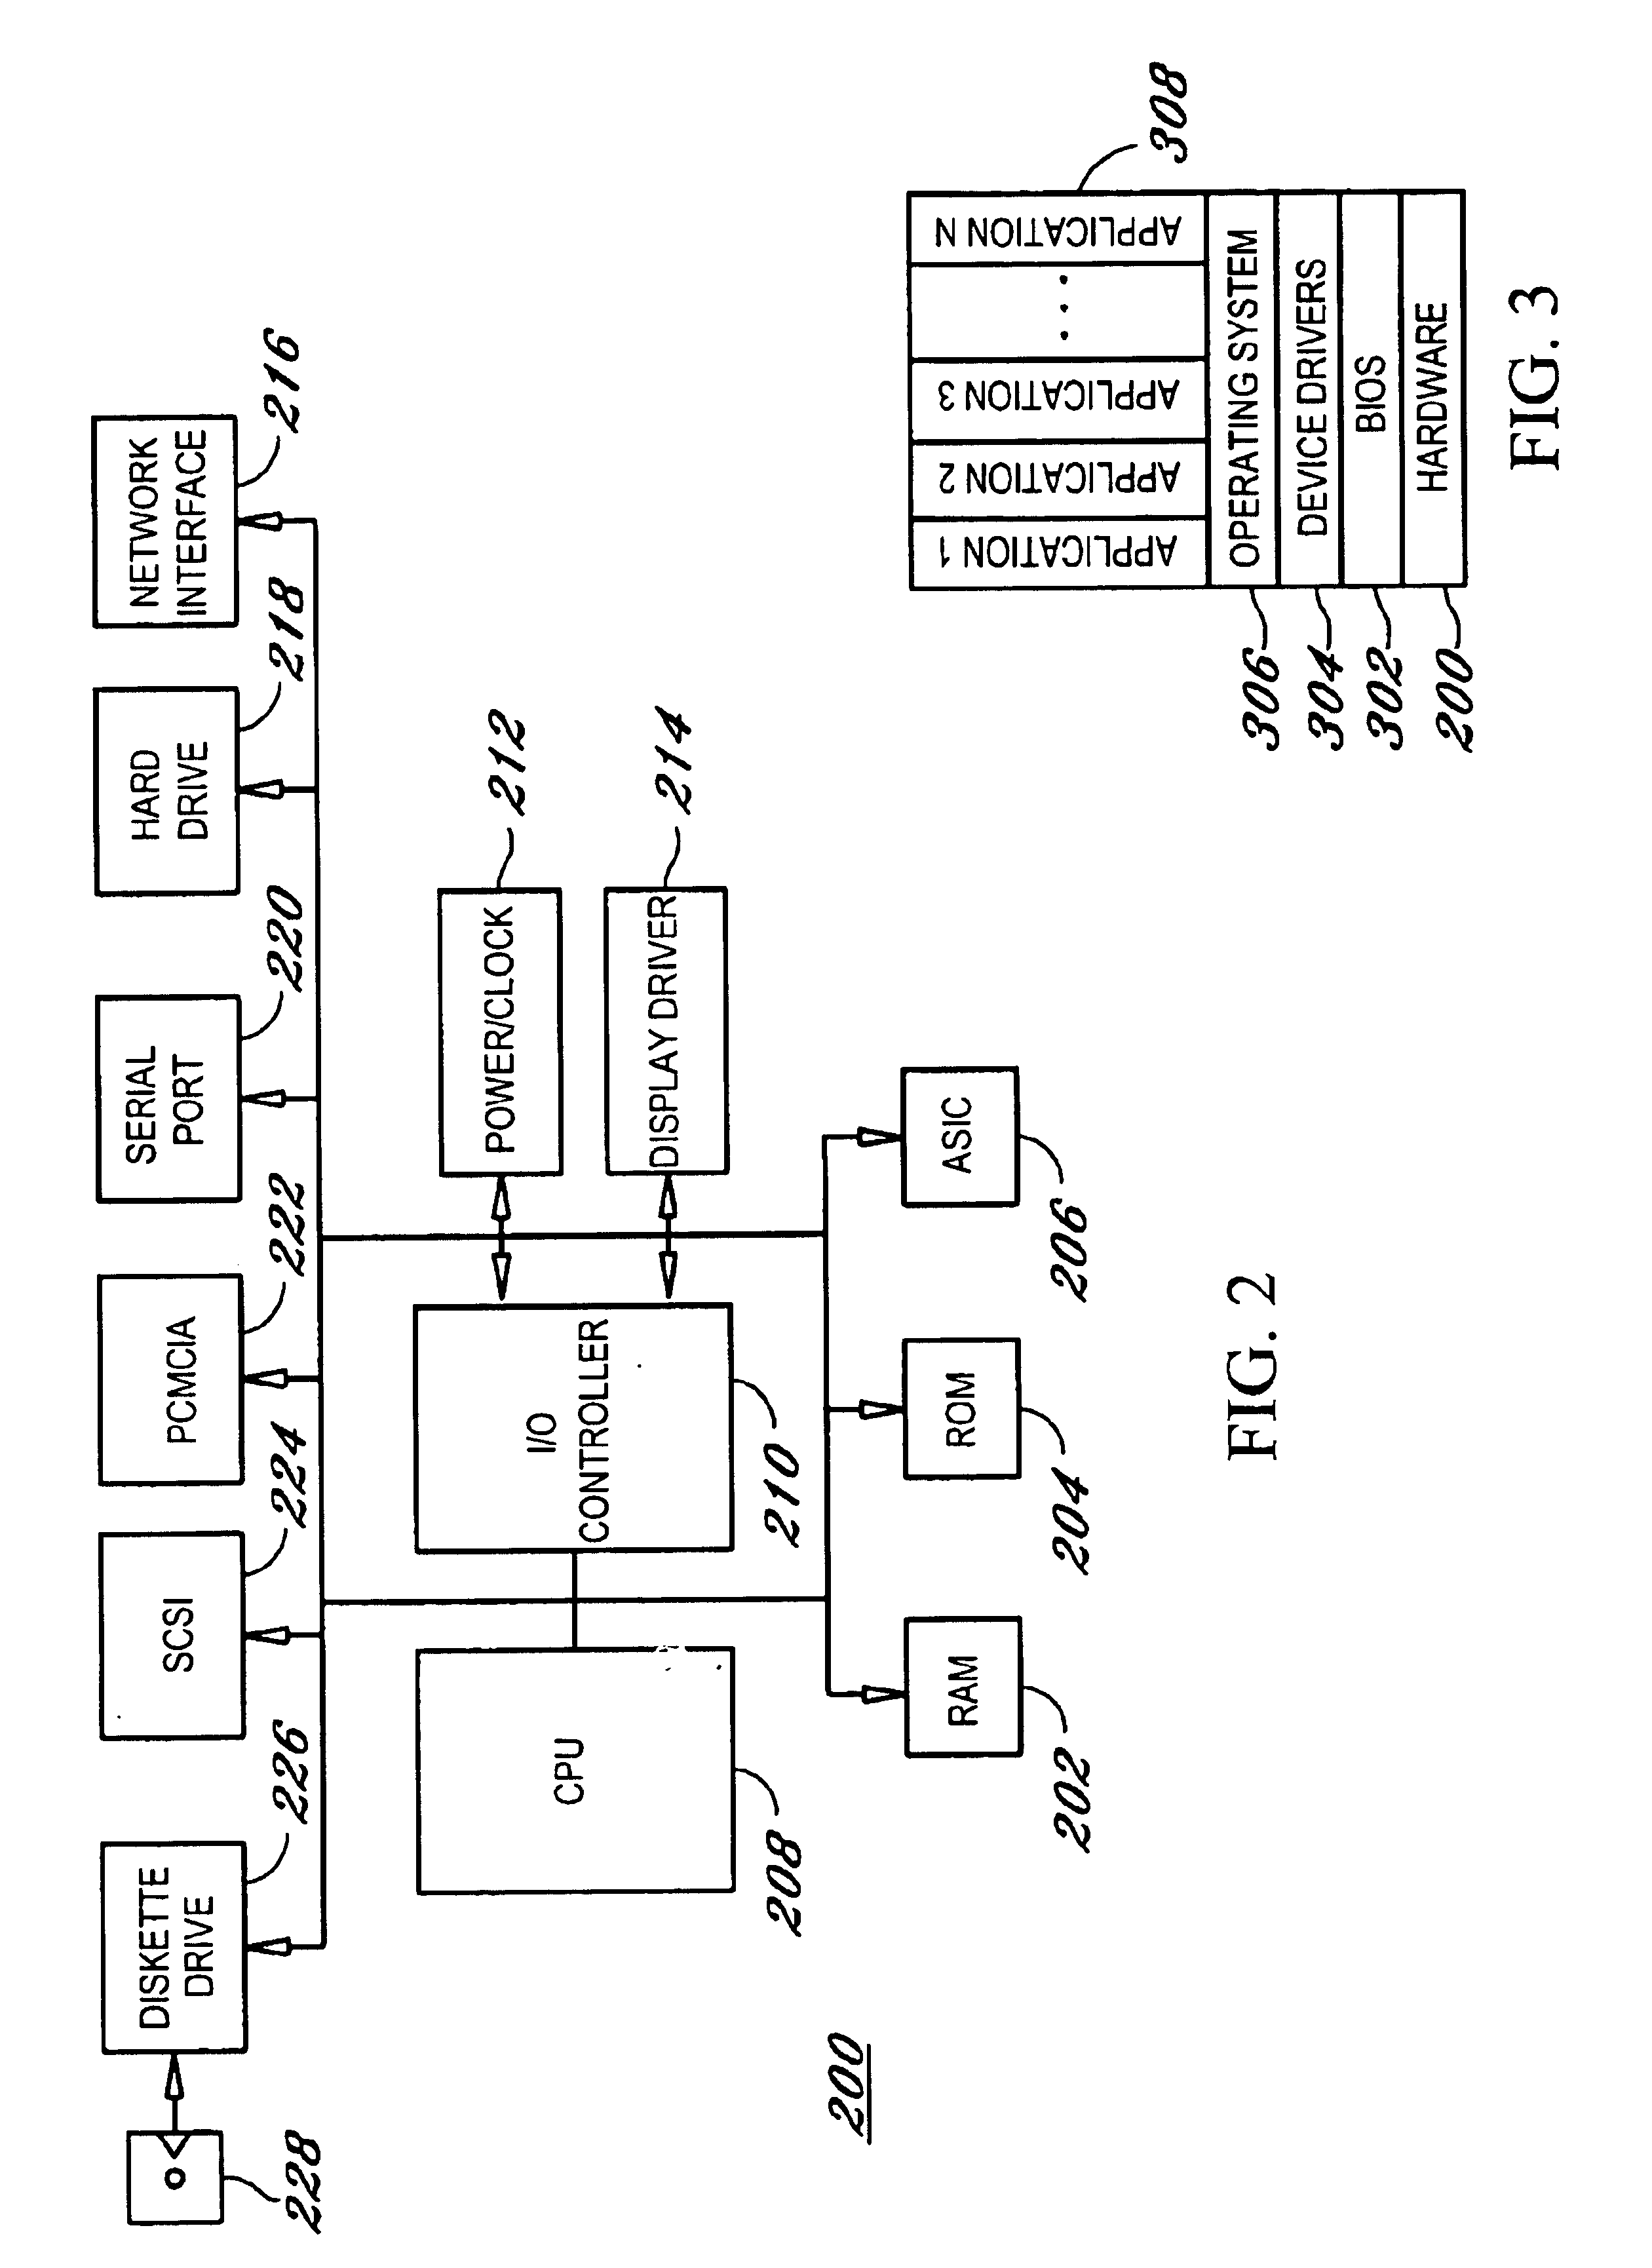 Method and apparatus to manage network client logon scripts using a graphical management and administration tool